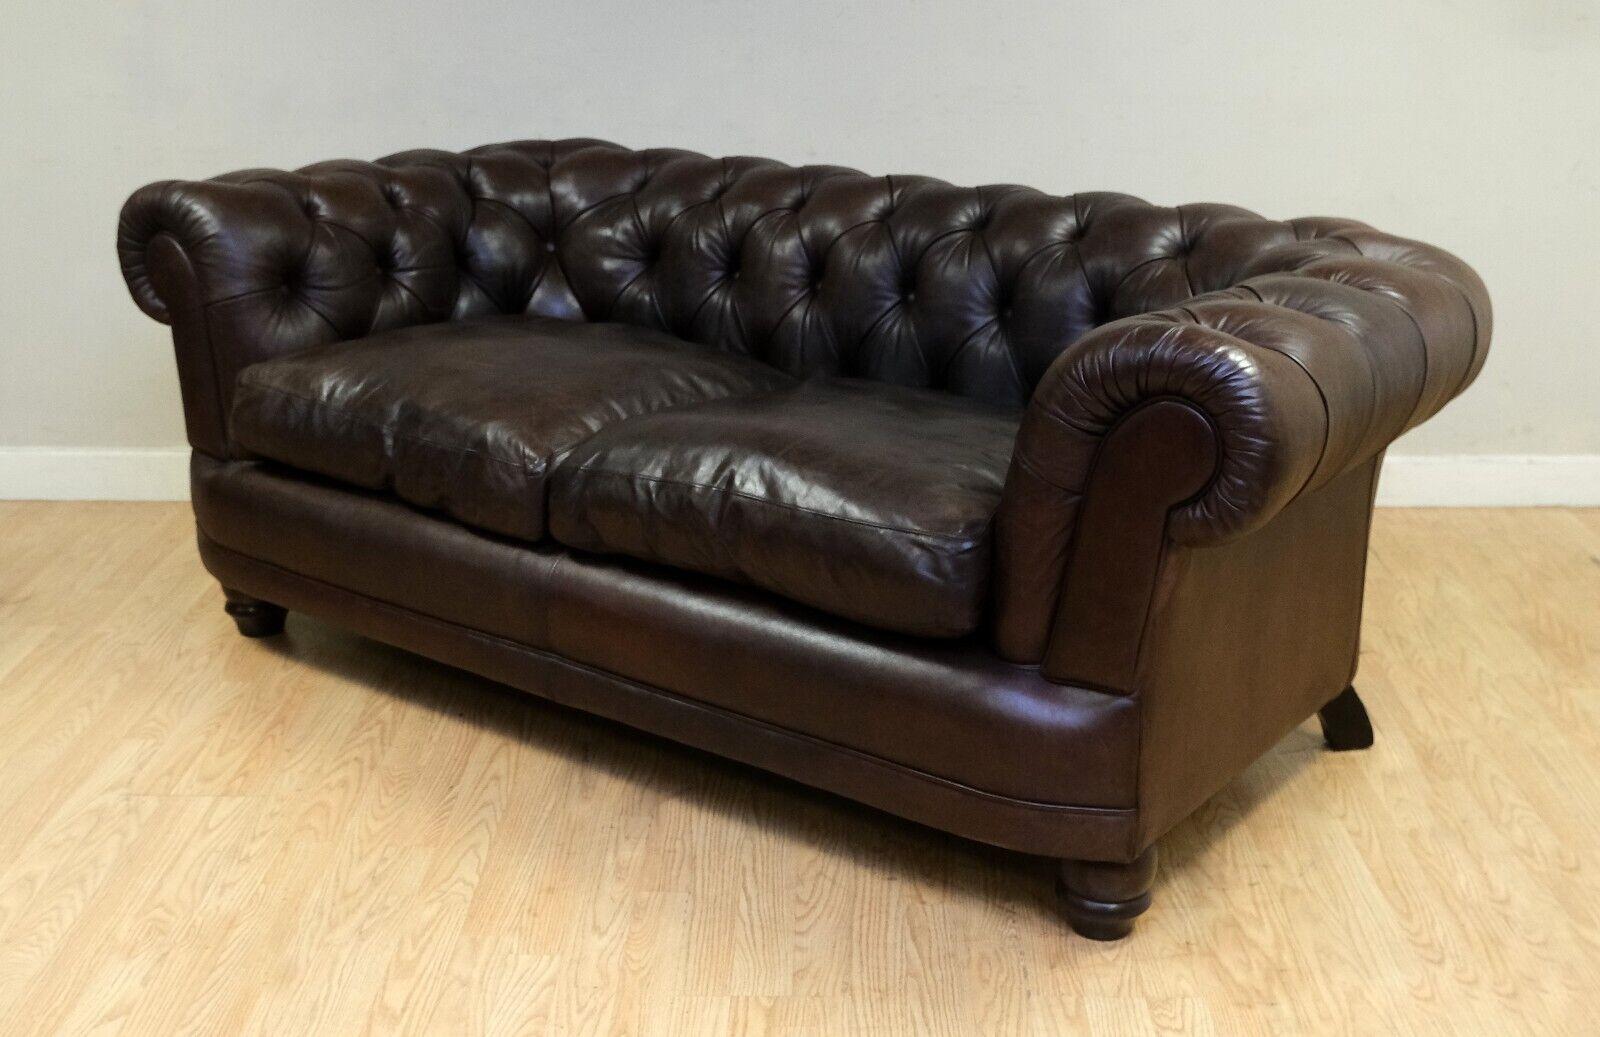 20th Century Choclate Brown Chesterfield Two Seater Leather Sofa Feather Filled Cushions